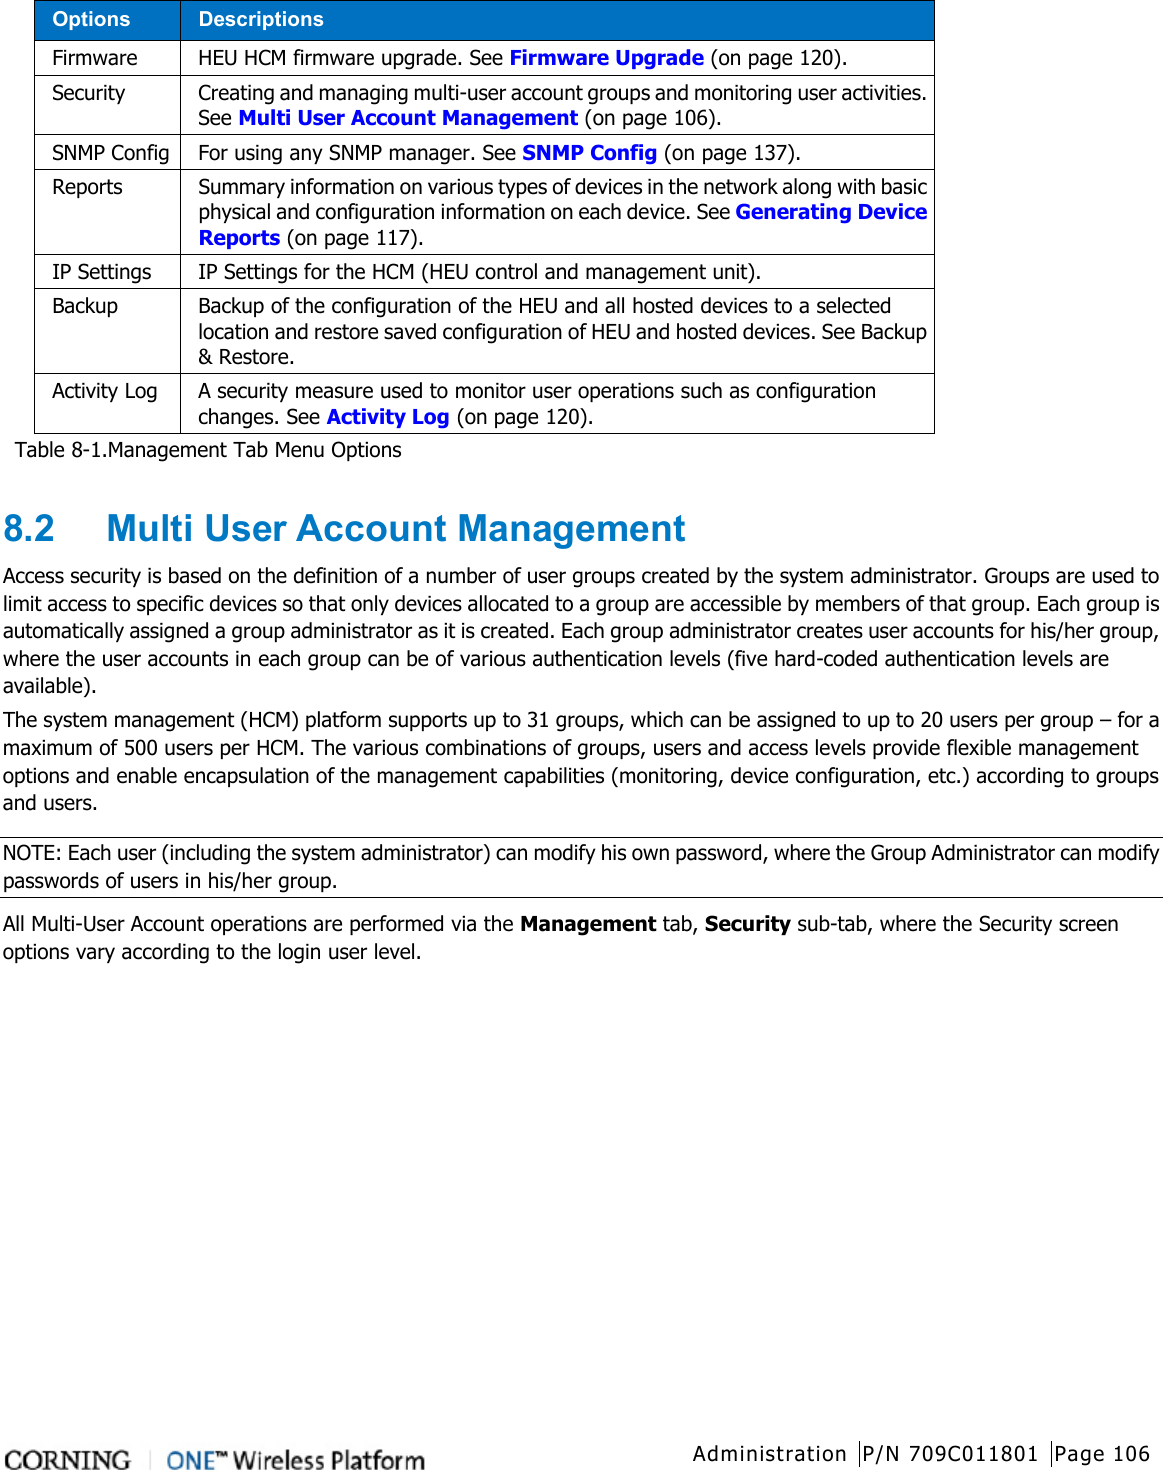  Administration P/N 709C011801 Page 106   Options Descriptions Firmware HEU HCM firmware upgrade. See Firmware Upgrade (on page 120). Security Creating and managing multi-user account groups and monitoring user activities. See Multi User Account Management (on page 106). SNMP Config For using any SNMP manager. See SNMP Config (on page 137). Reports Summary information on various types of devices in the network along with basic physical and configuration information on each device. See Generating Device Reports (on page 117). IP Settings IP Settings for the HCM (HEU control and management unit).   Backup Backup of the configuration of the HEU and all hosted devices to a selected location and restore saved configuration of HEU and hosted devices. See Backup &amp; Restore. Activity Log A security measure used to monitor user operations such as configuration changes. See Activity Log (on page 120). Table  8-1.Management Tab Menu Options  8.2  Multi User Account Management Access security is based on the definition of a number of user groups created by the system administrator. Groups are used to limit access to specific devices so that only devices allocated to a group are accessible by members of that group. Each group is automatically assigned a group administrator as it is created. Each group administrator creates user accounts for his/her group, where the user accounts in each group can be of various authentication levels (five hard-coded authentication levels are available). The system management (HCM) platform supports up to 31 groups, which can be assigned to up to 20 users per group – for a maximum of 500 users per HCM. The various combinations of groups, users and access levels provide flexible management options and enable encapsulation of the management capabilities (monitoring, device configuration, etc.) according to groups and users. NOTE: Each user (including the system administrator) can modify his own password, where the Group Administrator can modify passwords of users in his/her group. All Multi-User Account operations are performed via the Management tab, Security sub-tab, where the Security screen options vary according to the login user level. 